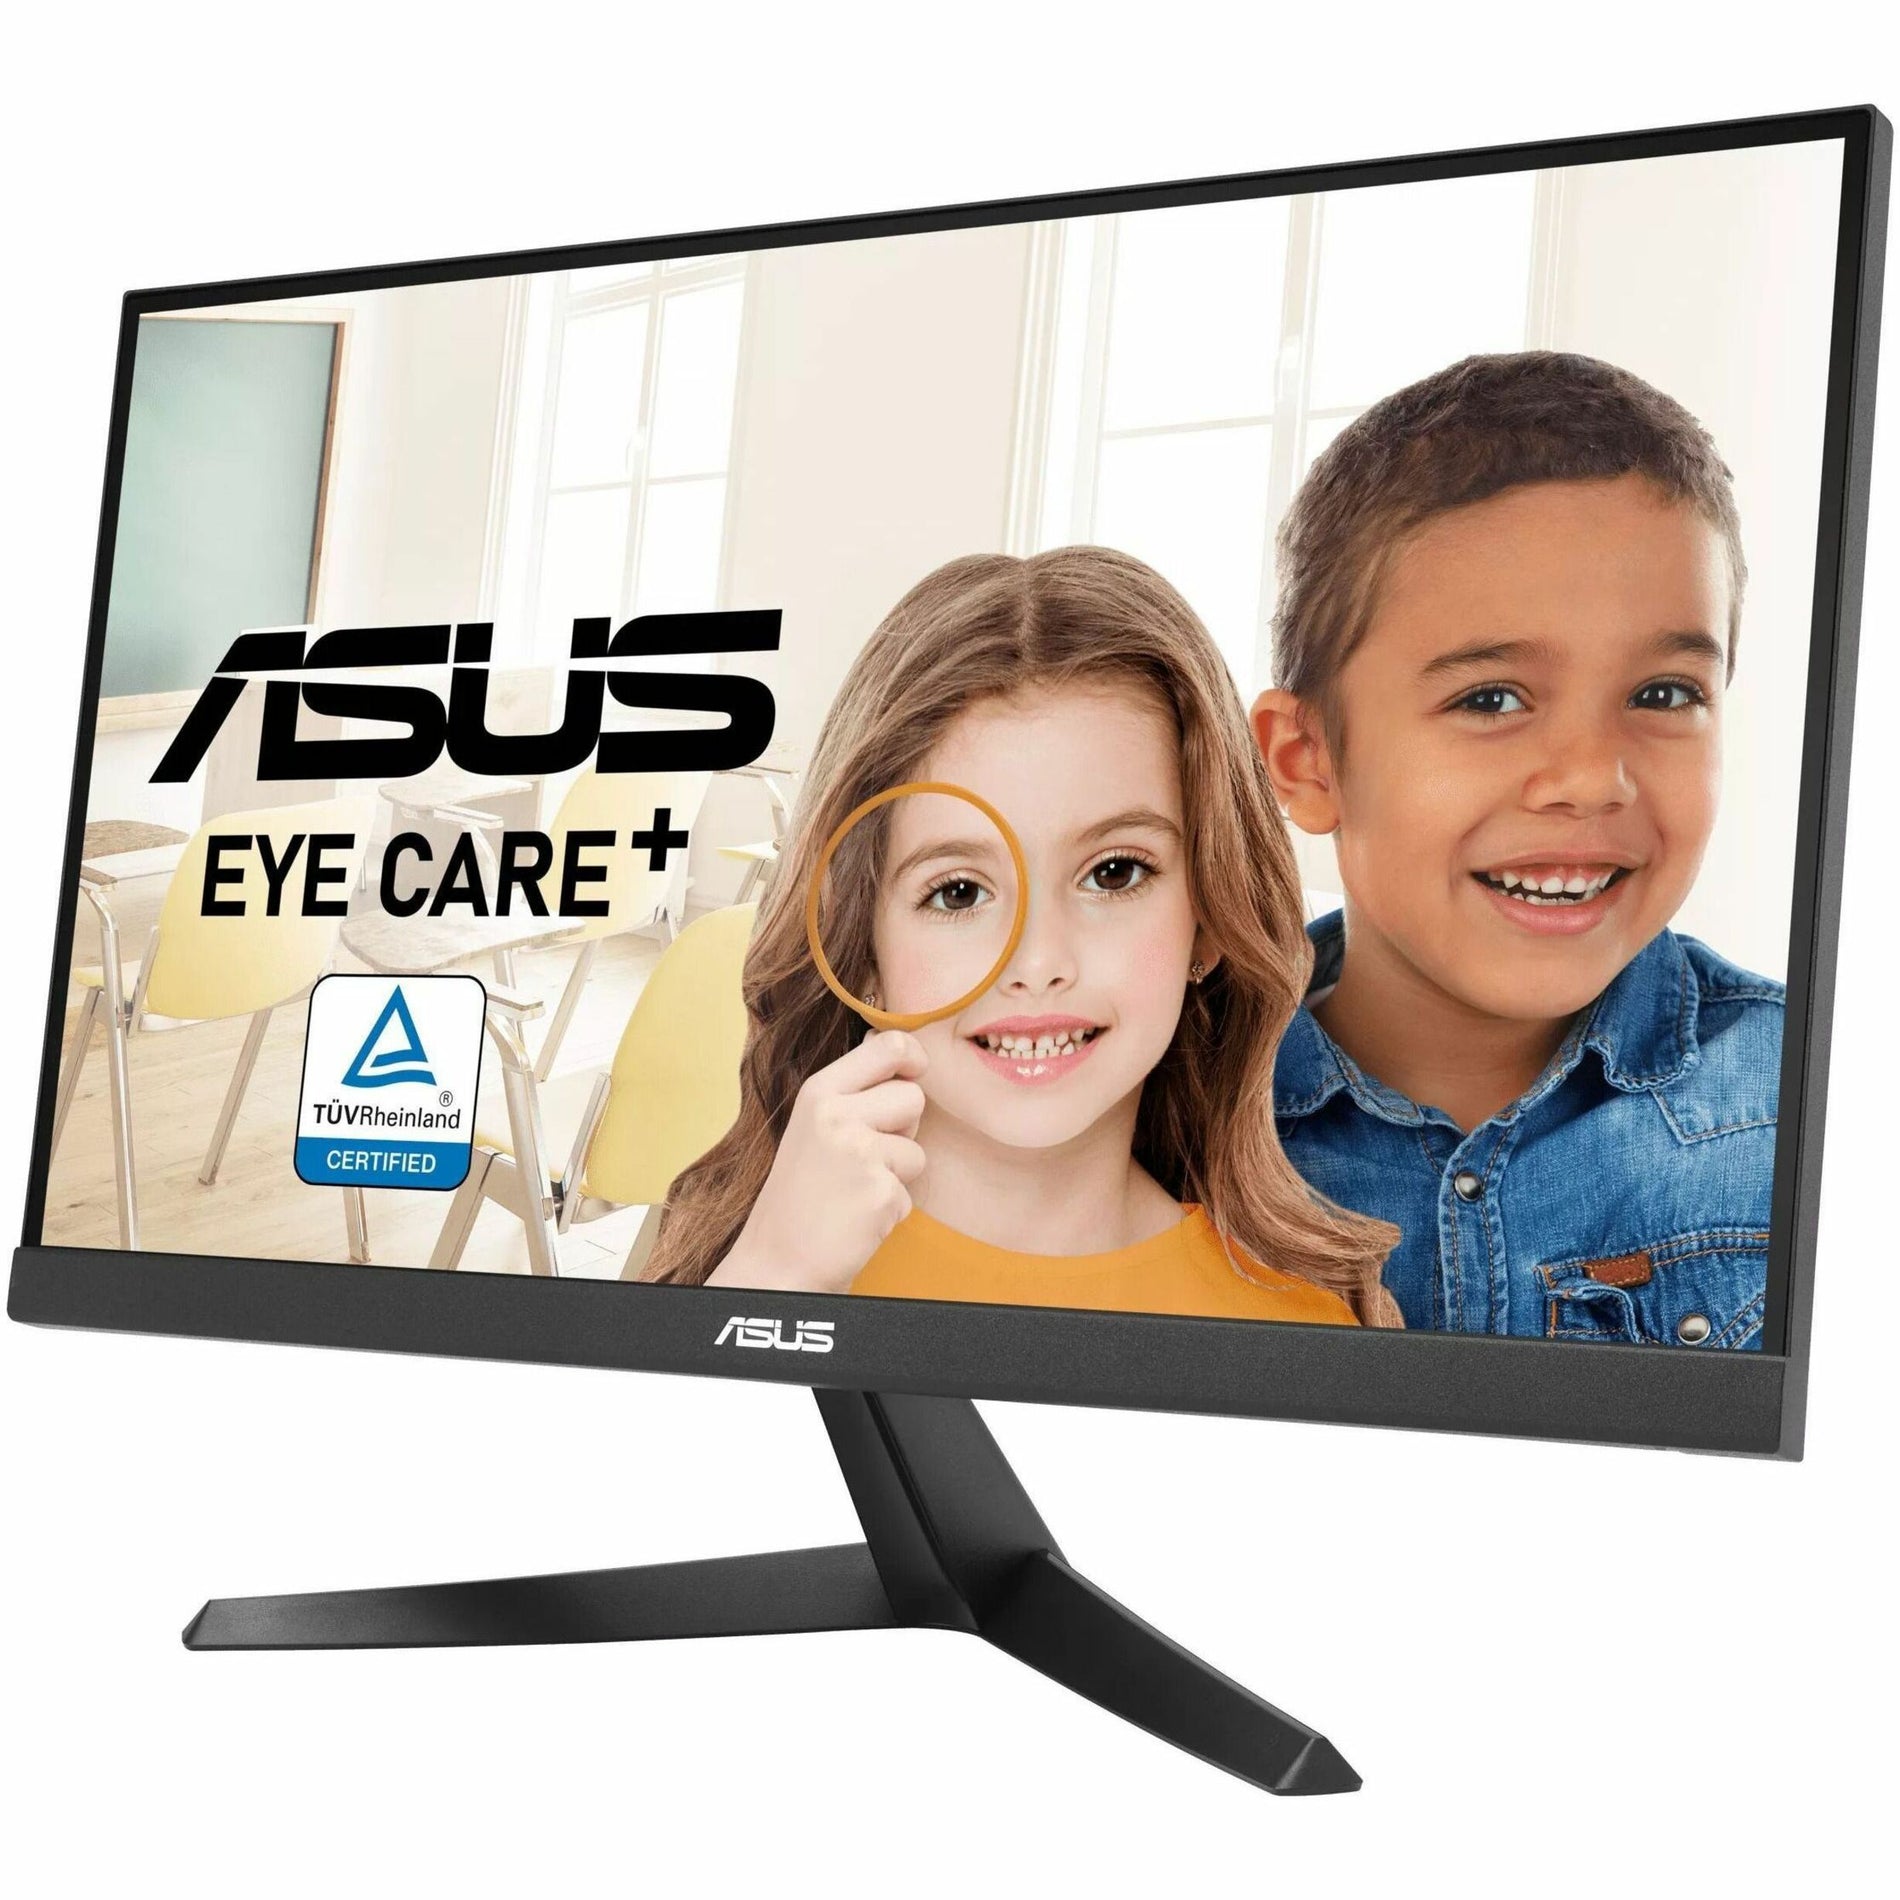 Asus VY229HE Full HD LED Monitor - 16:9, 22" IPS Panel, 1ms Response Time, Adaptive Sync